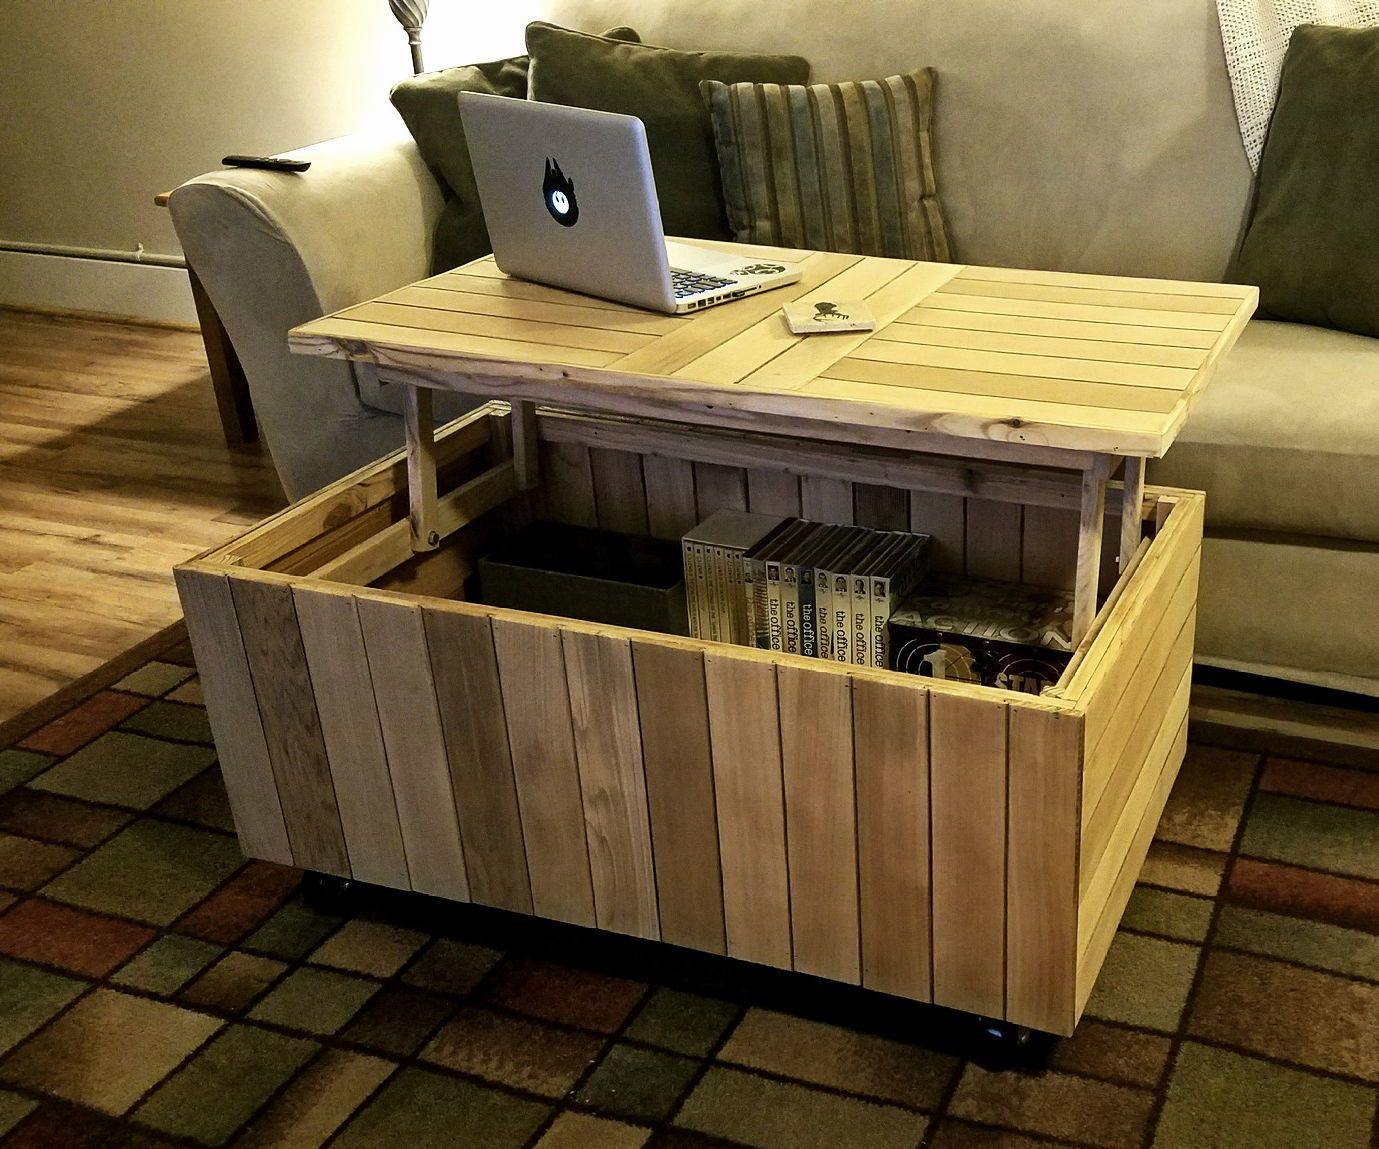 DIY Lift Top Coffee Table Plans
 Reclaimed Lift Top Coffee Table